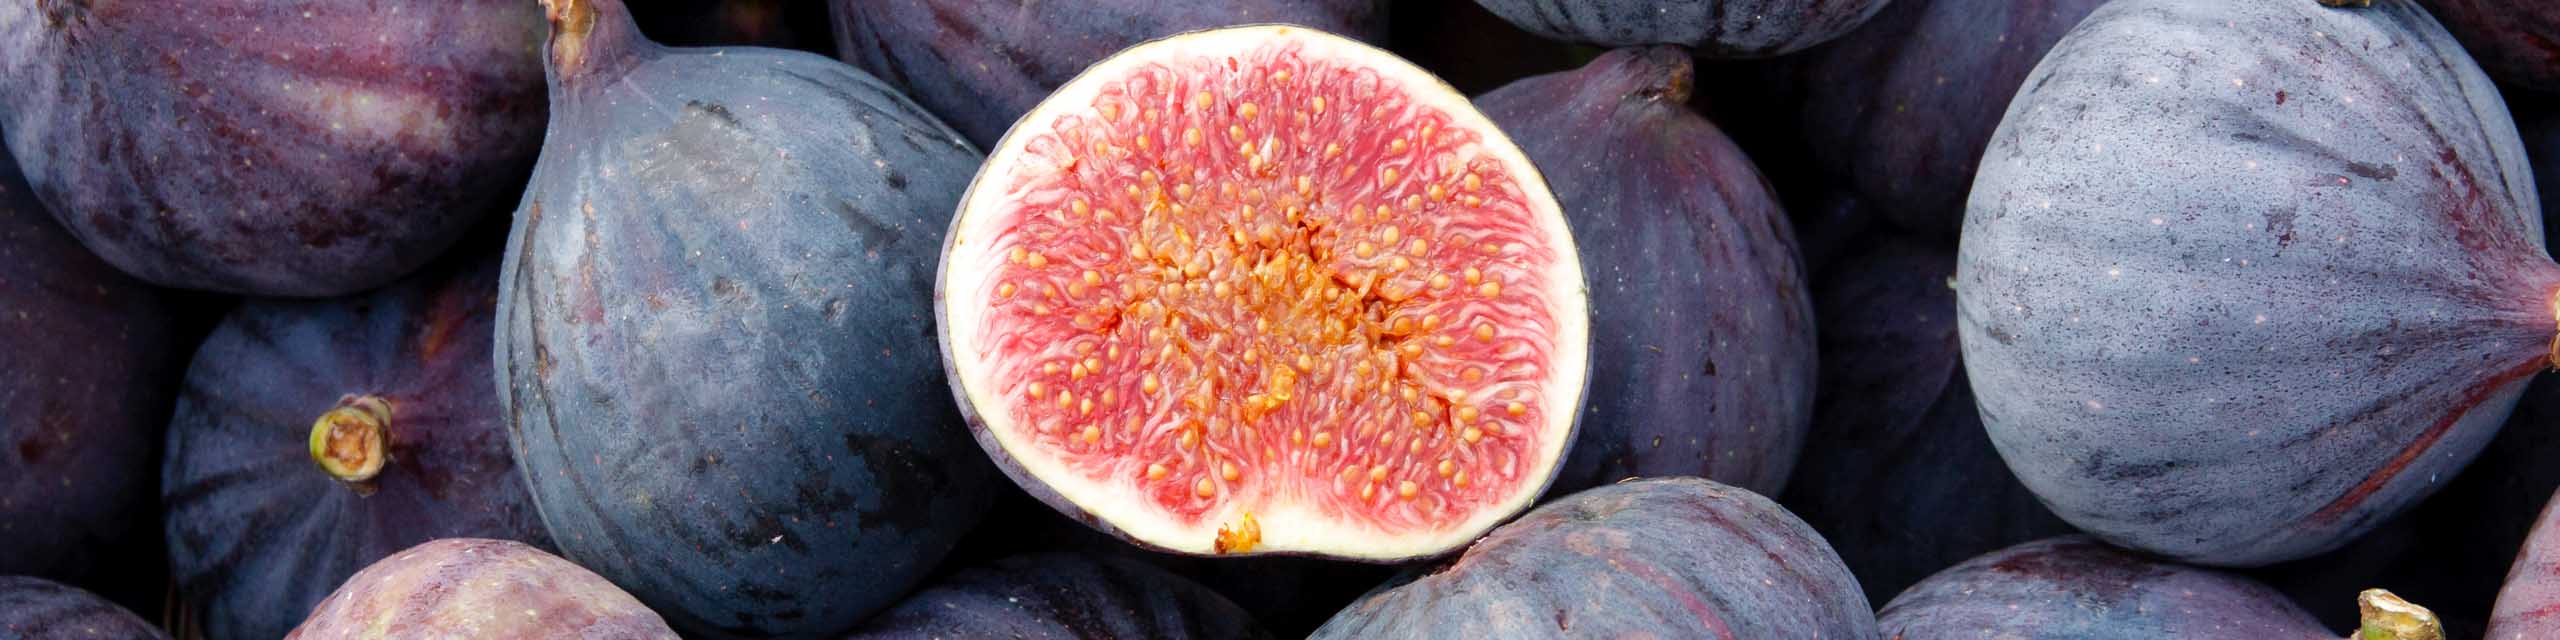 A pile of purple colored fig fruit.